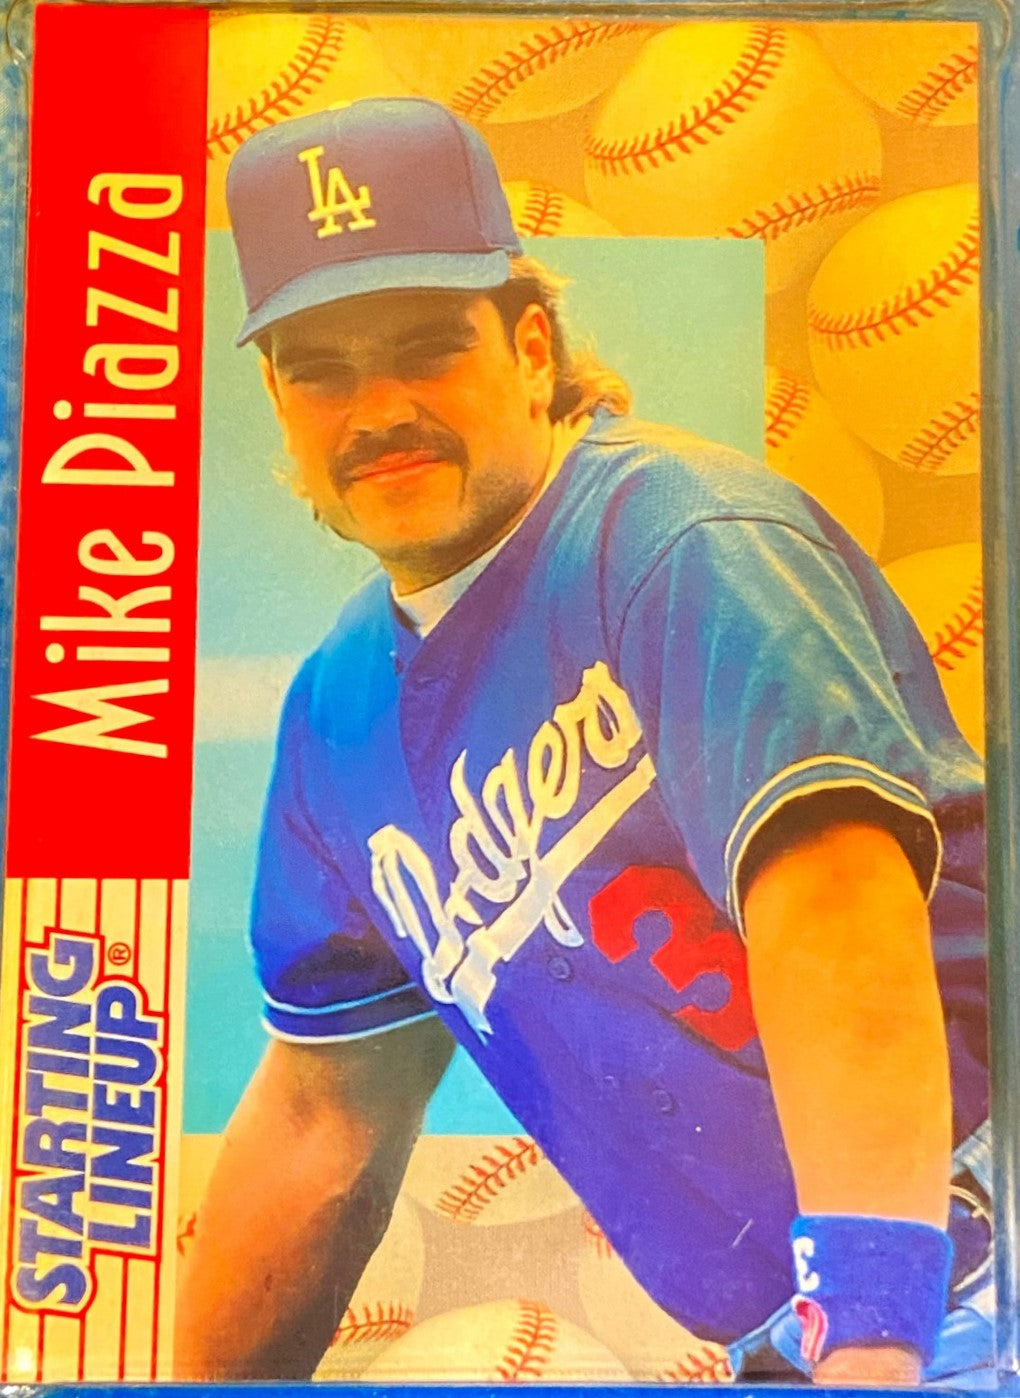 Mike Piazza 1997 MLB Los Angeles Dodgers Starting Lineup Figurine Used by Kenner